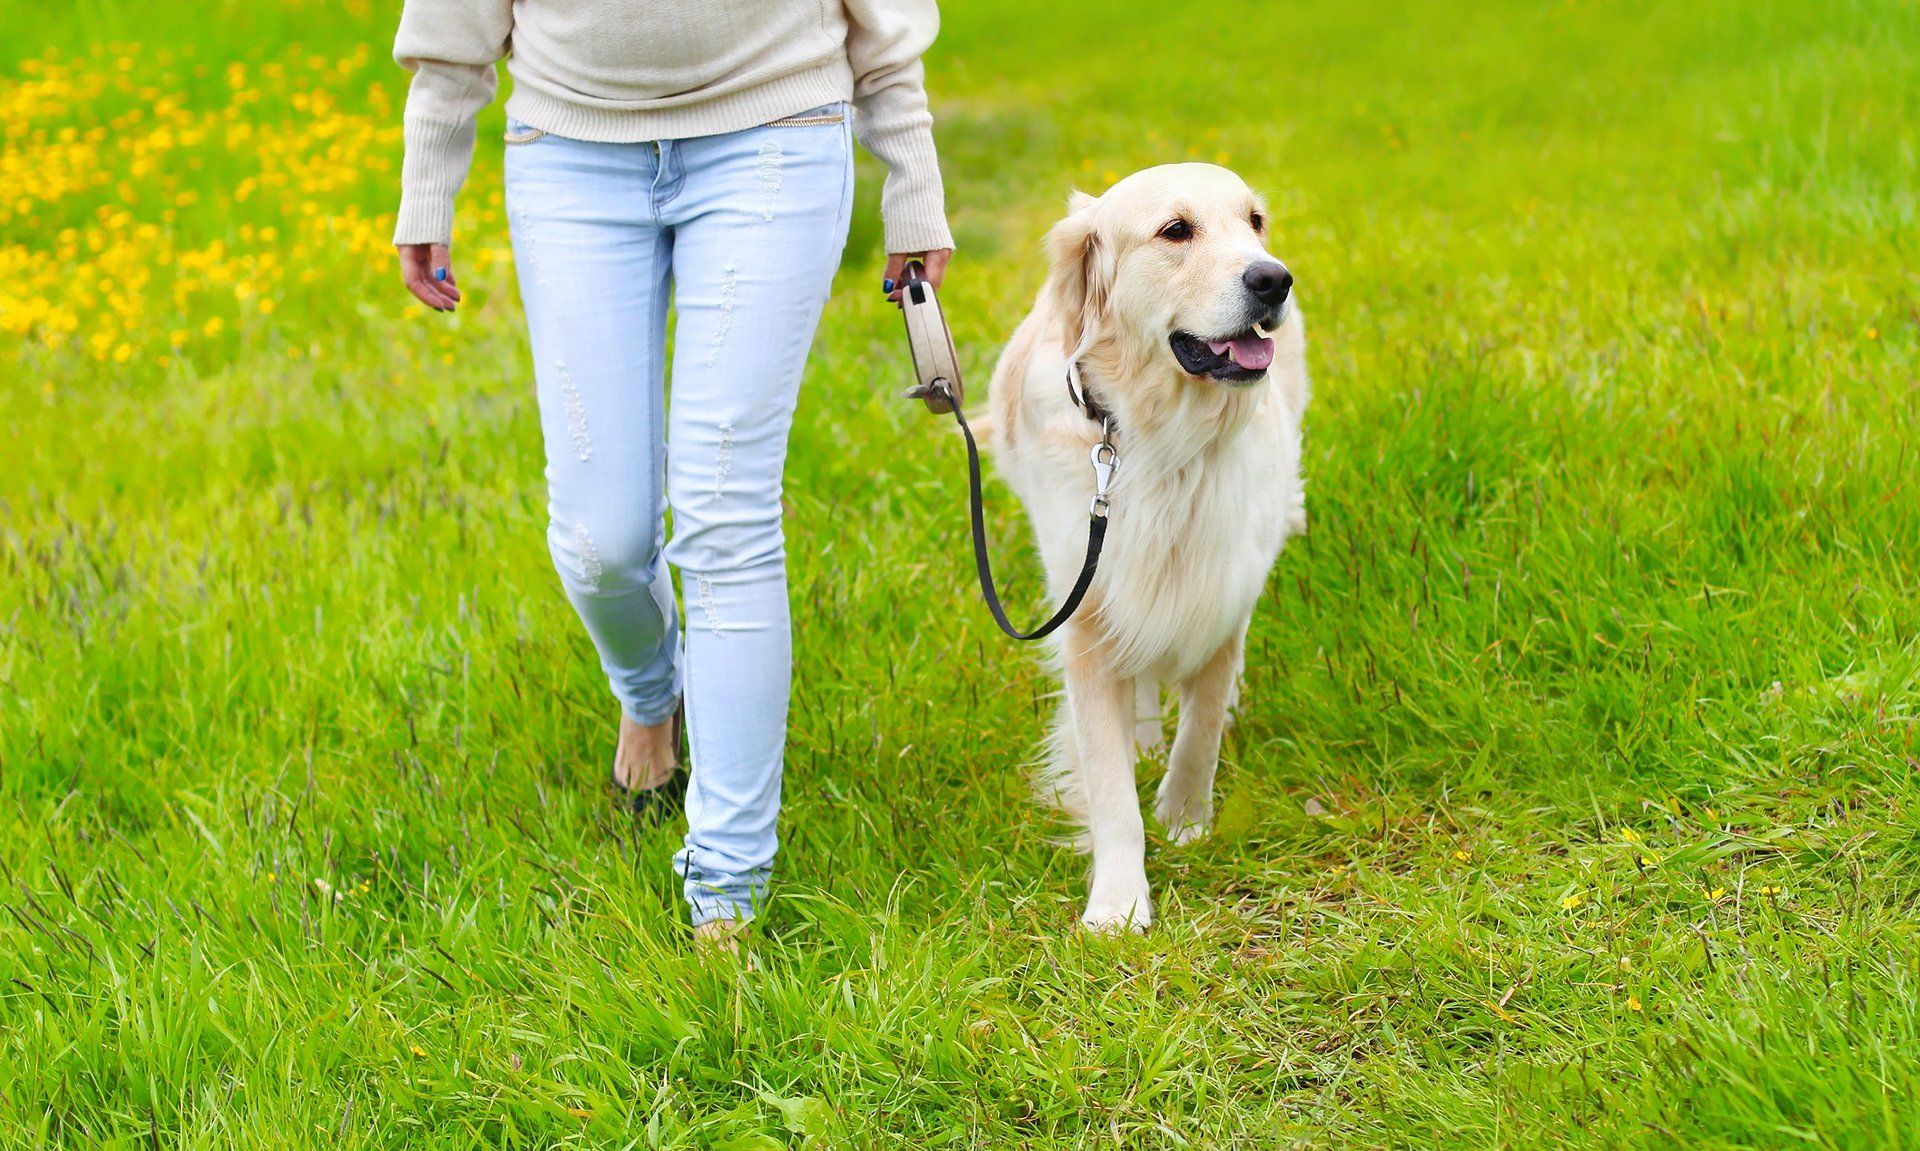 Hooman on Demand offers dog walker jobs in the Raleigh area